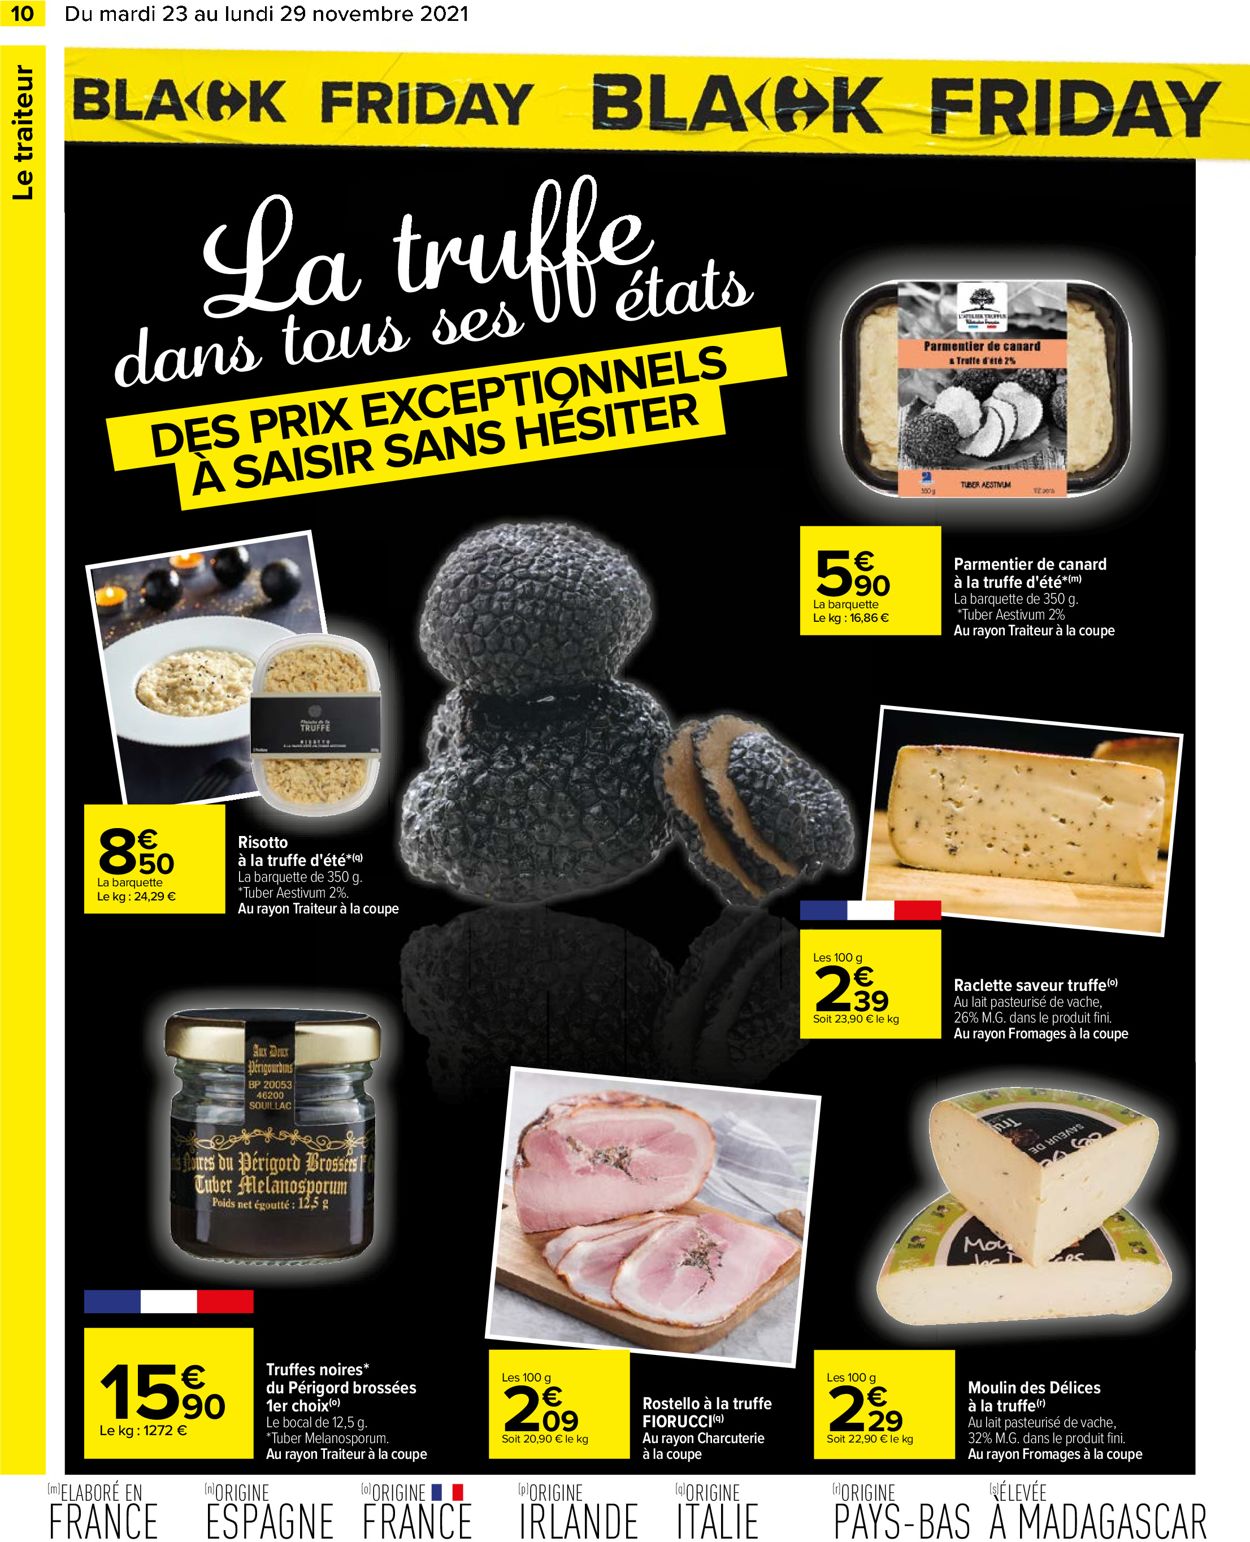 Carrefour BLACK WEEK 2021 Catalogue - 23.11-29.11.2021 (Page 10)